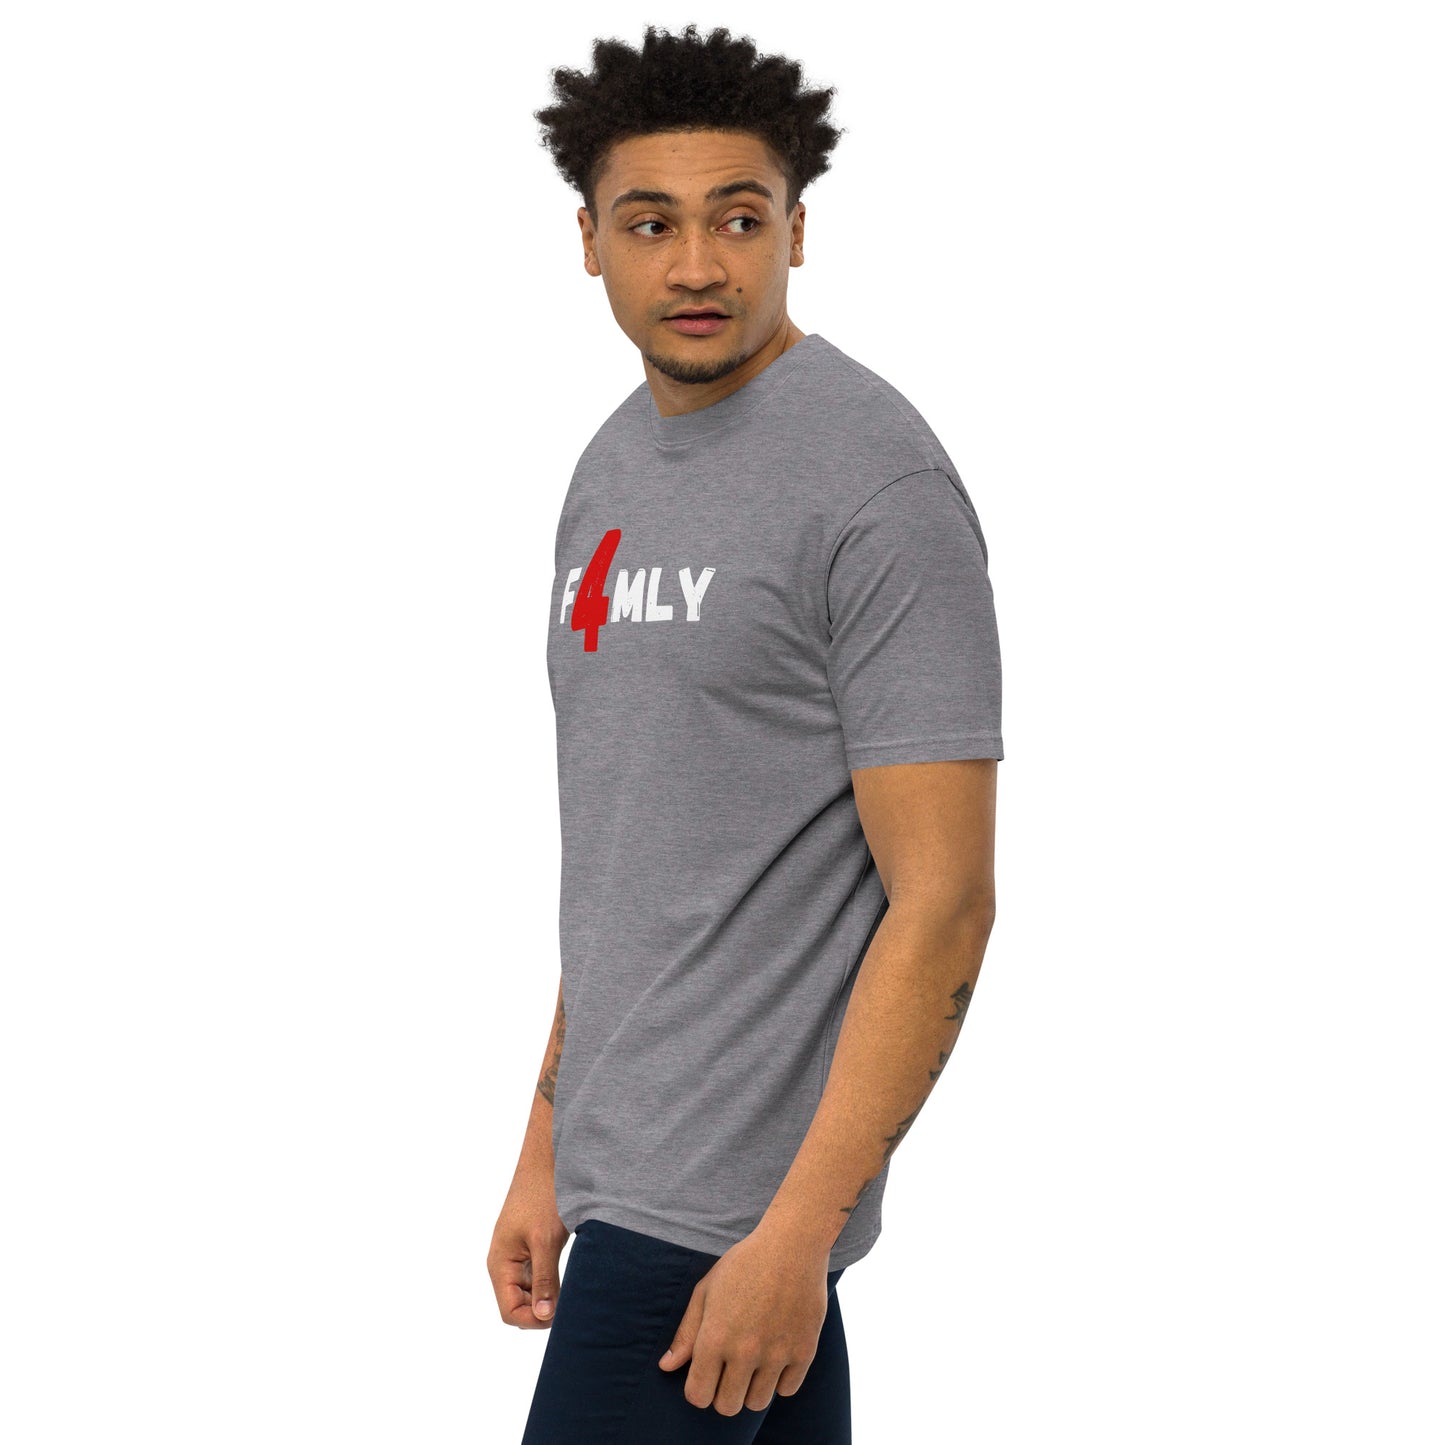 4LY OVER EVERYTHING Tee